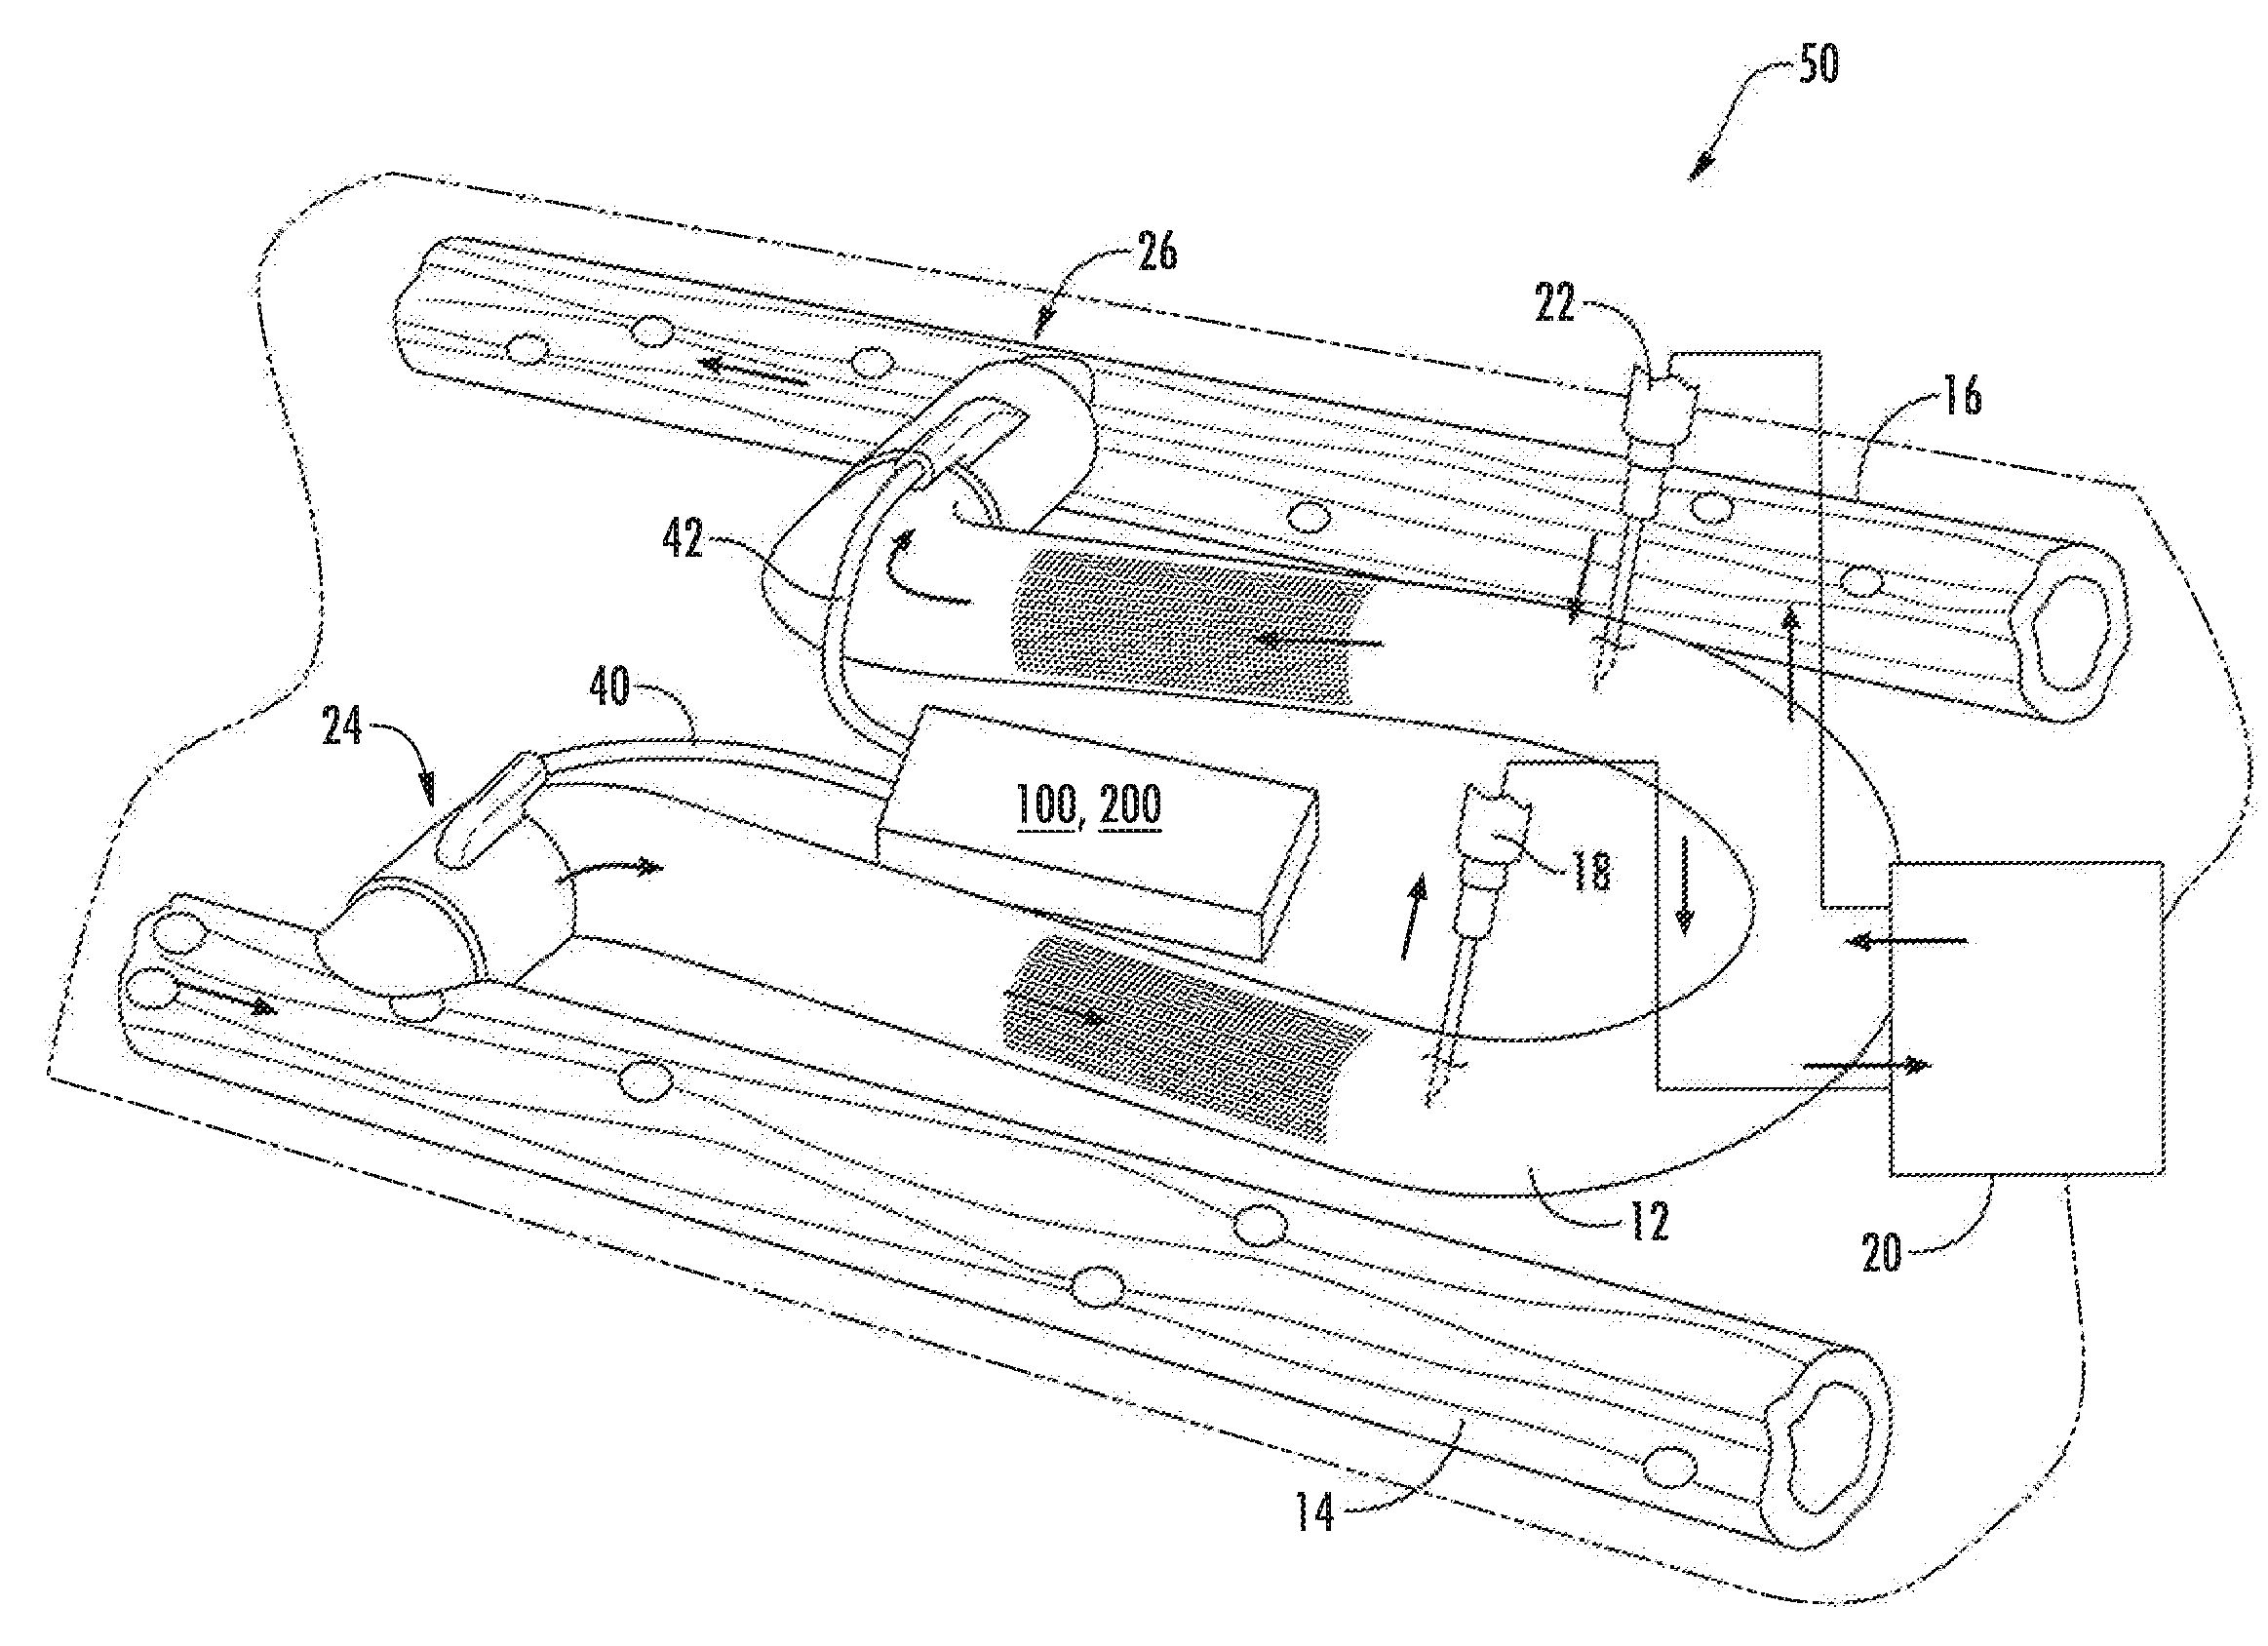 Magnetically activated arteriovenous access valve system and related methods